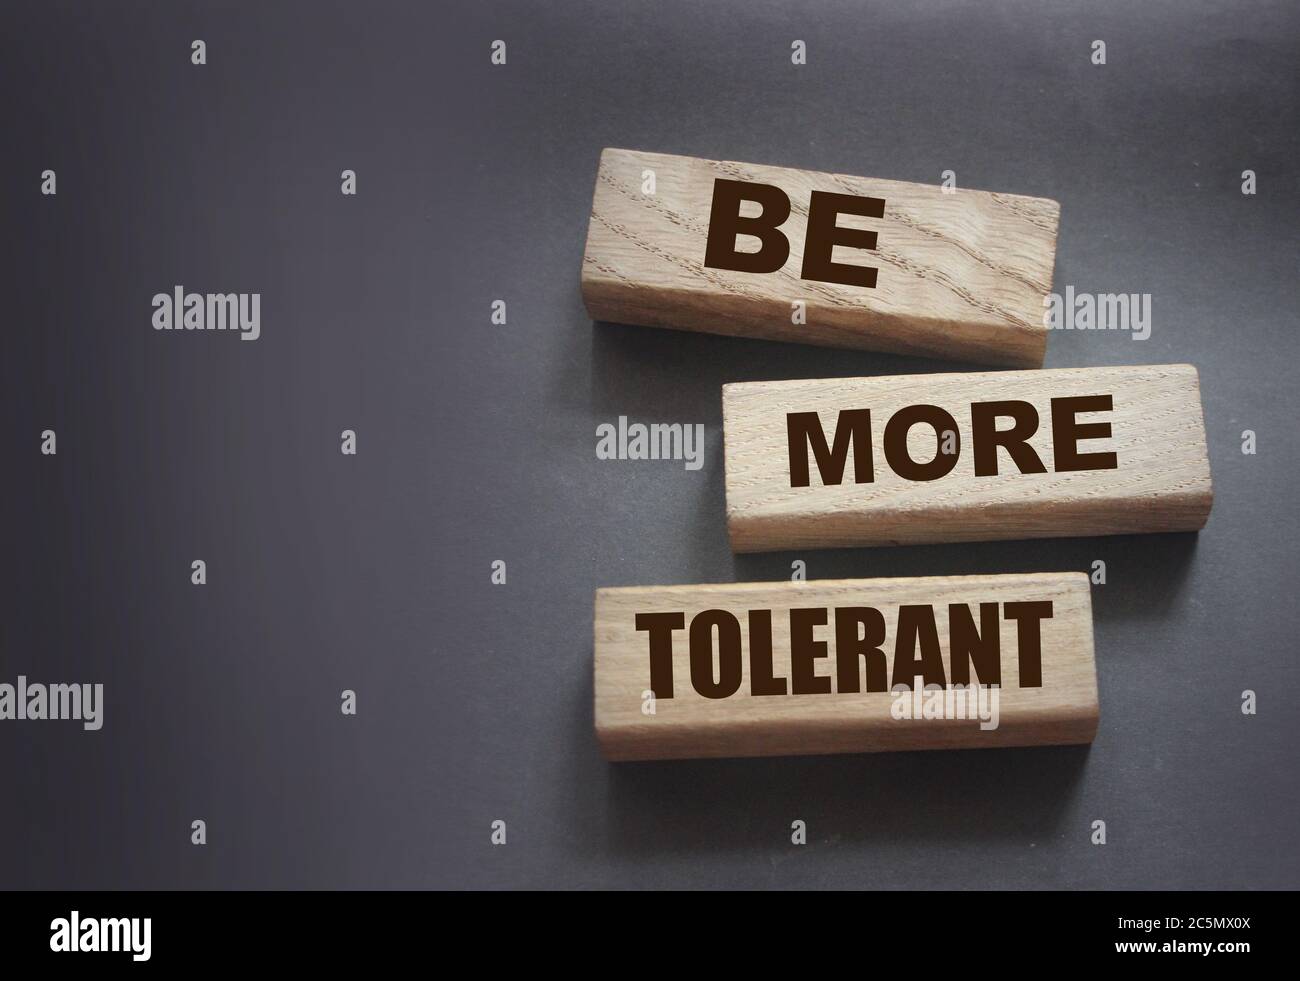 Be More Tolerant words on wooden blocks on dark background. Tolerance Equality diversity social concept Stock Photo